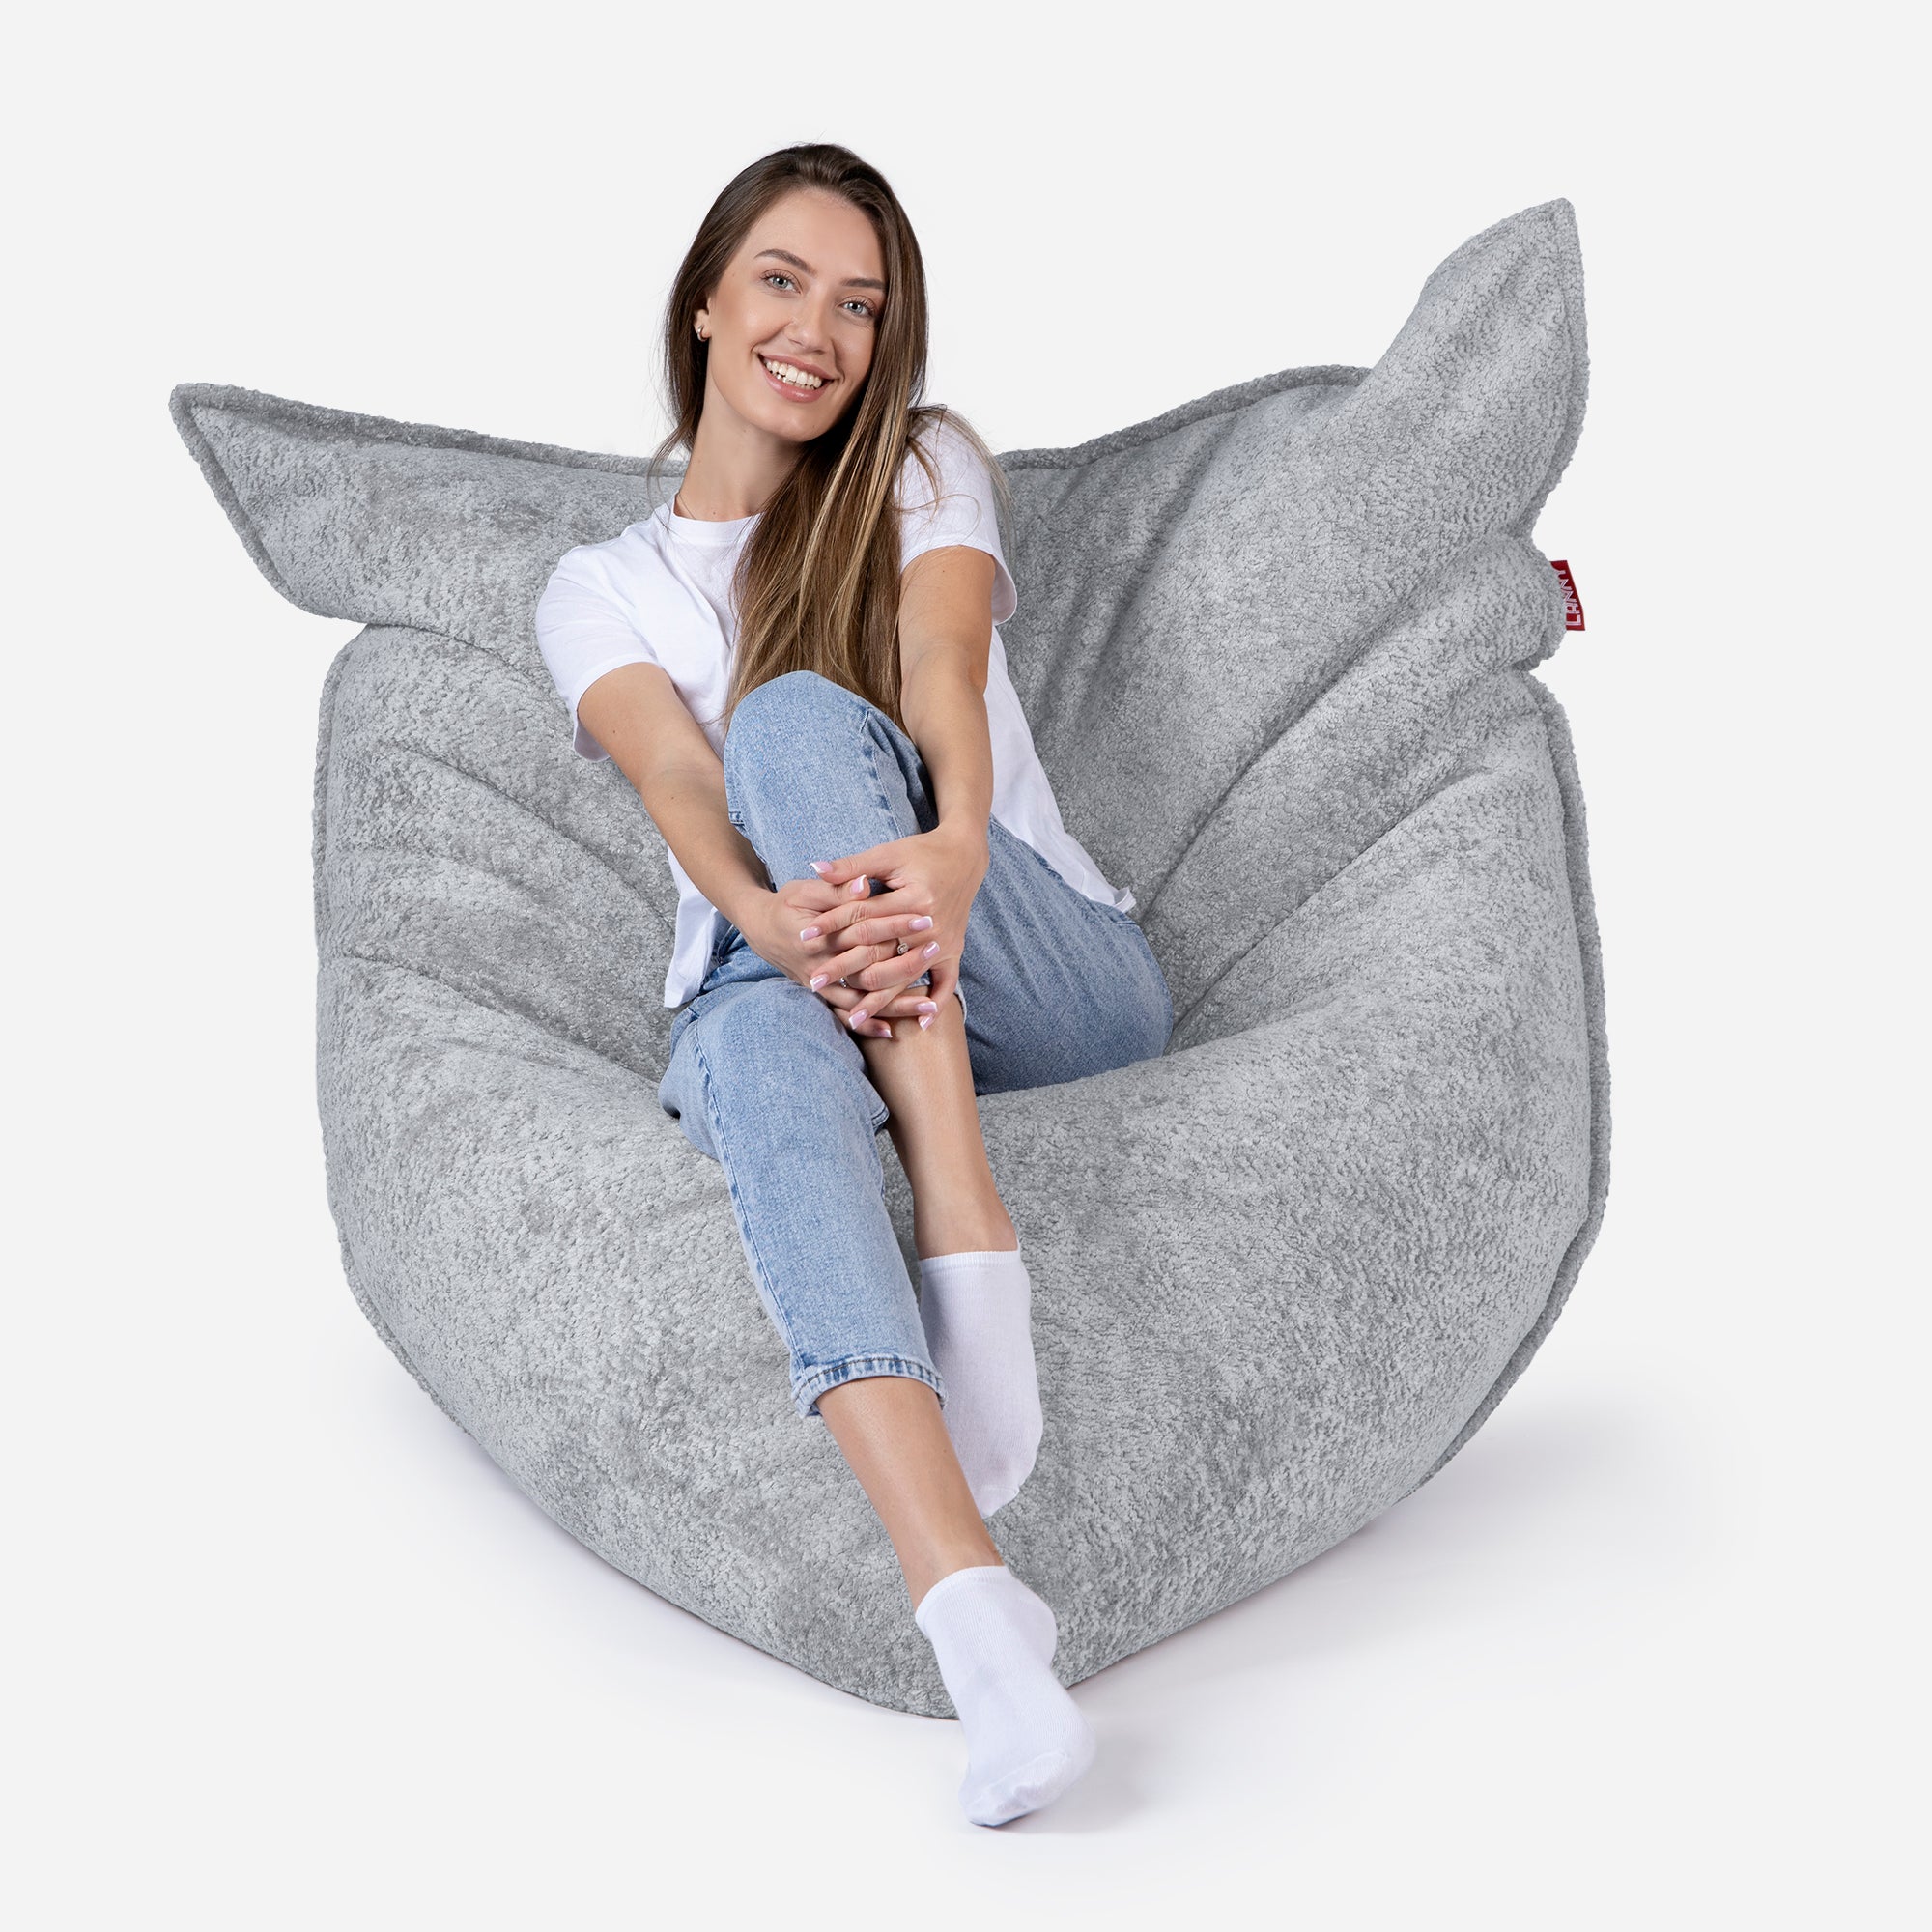 Beanbag Sloppy design fluffy fabric Gray color  with girl seating on it 